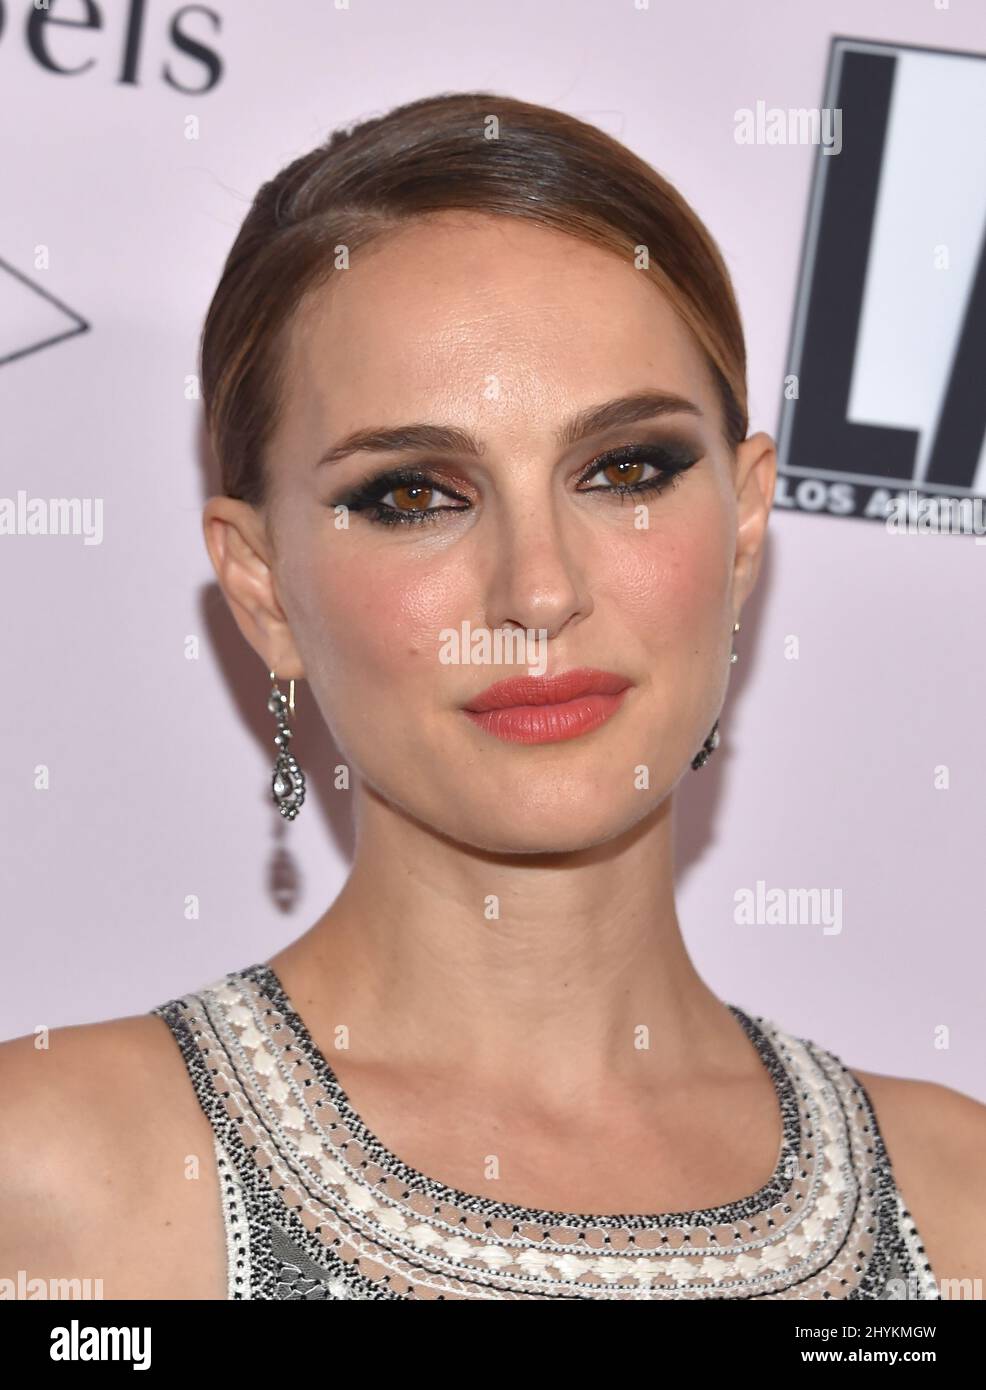 Natalie Portman at the 2019 L.A. Dance Project Annual Gala held at Hauser & Wirth on October 19, 2019 in Los Angeles, CA. Stock Photo